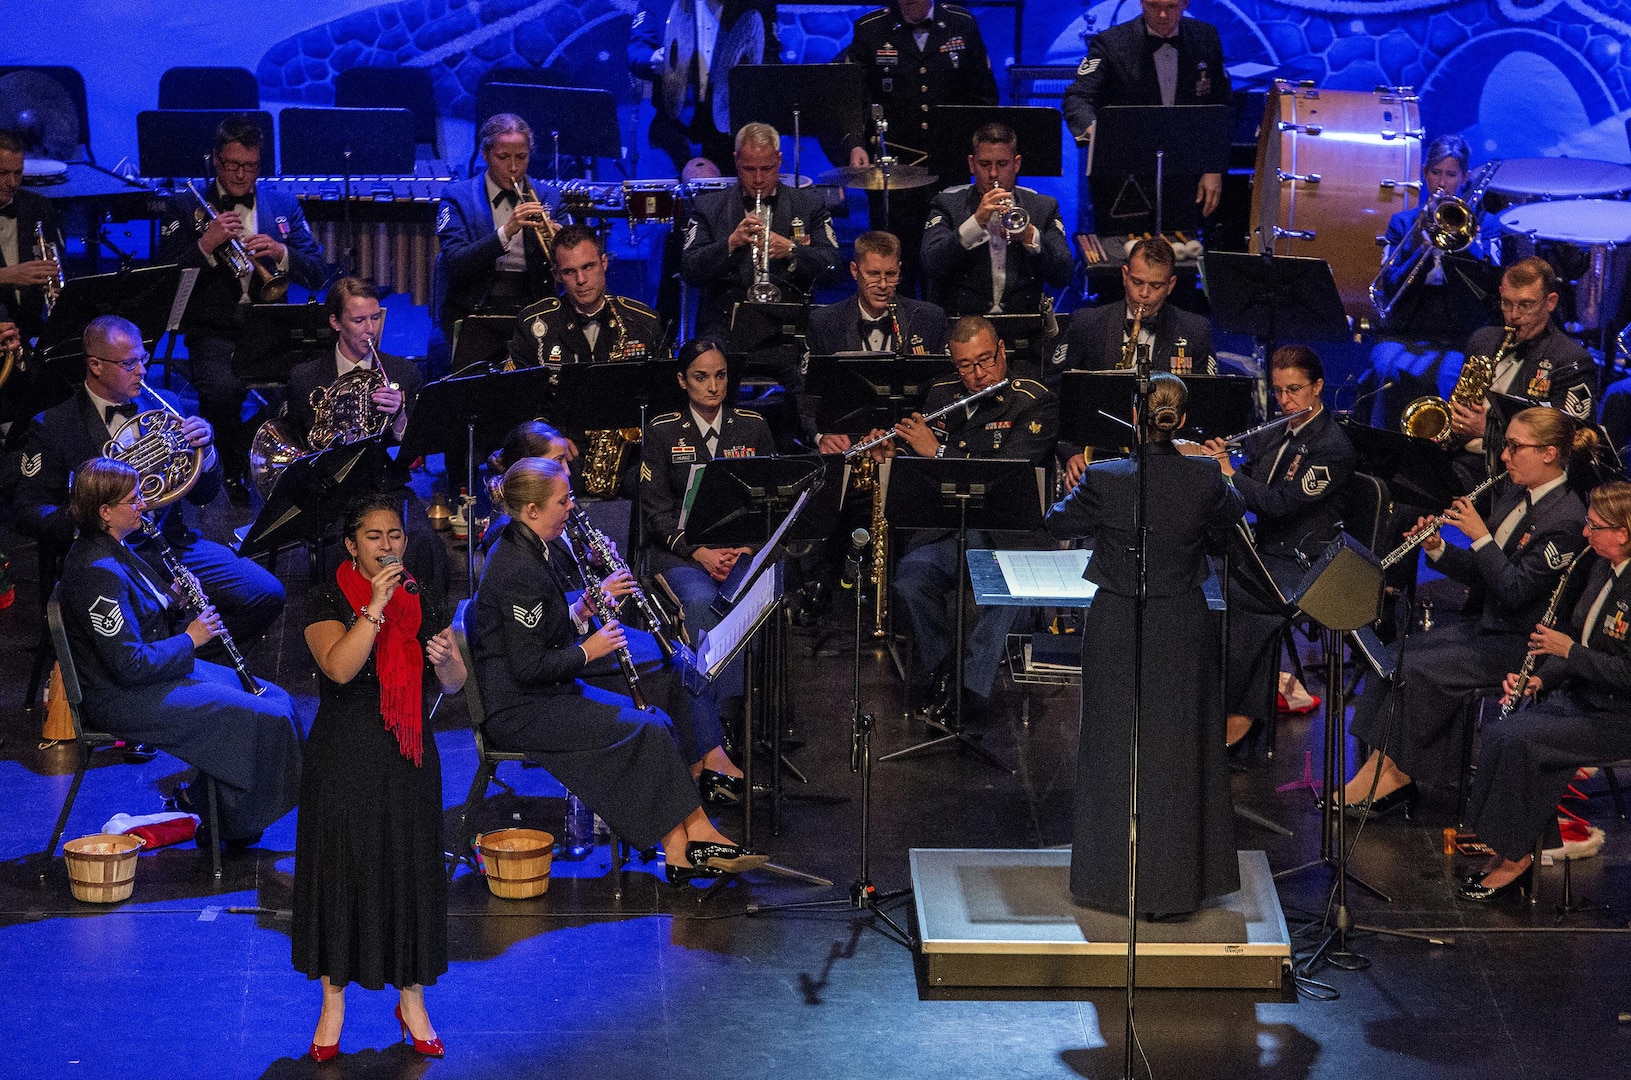 Airman 1st Class Alycia Cancel, United States Air Force Band of the West vocalist, performs during the Holiday in Blue concert Dec. 7, 2015 at the Edgewood Independent School District Theatre for the Performing Arts in San Antonio, Texas. The concert included a variety of holiday songs from around the world, a children’s story and a sing-a-long. Attendees included members of JBSA, community members and retirees. The Airmen assigned to the band are highly-trained professional musicians who have dedicated themselves to serving their country through music. (U.S. Air Force photo by Johnny Saldivar)